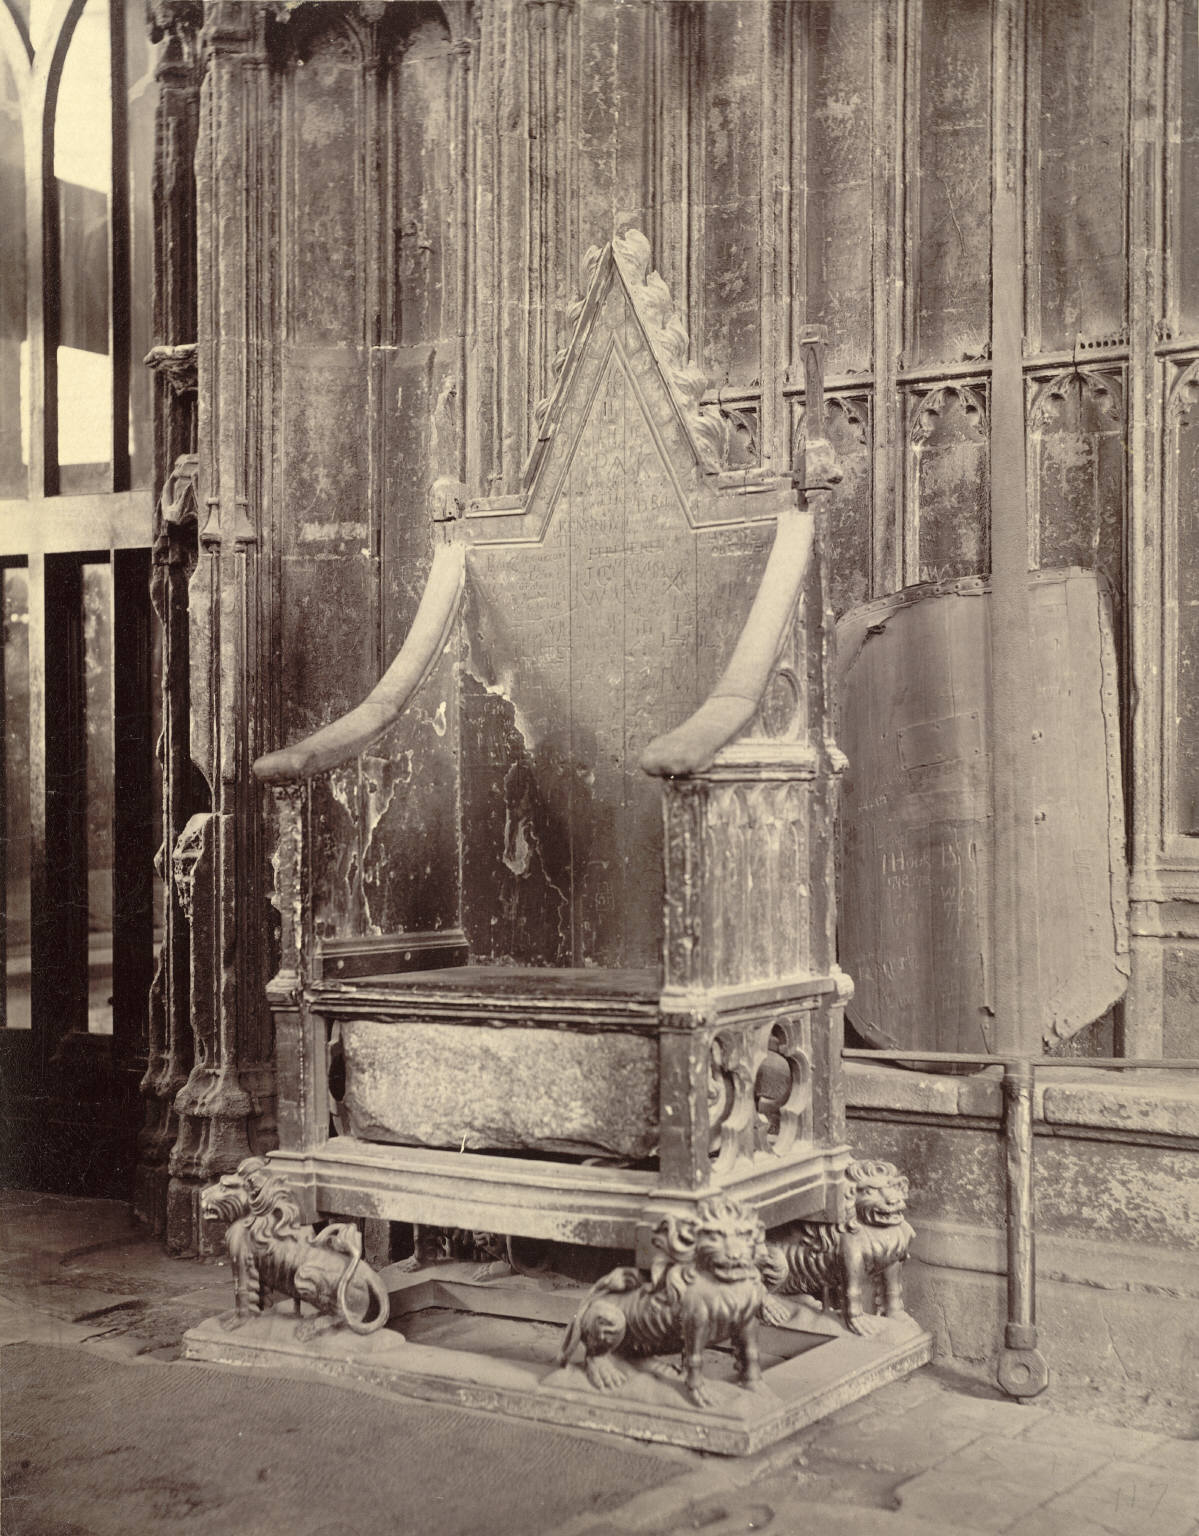 The stone was placed under King Edward’s Chair – on which most subsequent English and then British sovereigns have been crowned